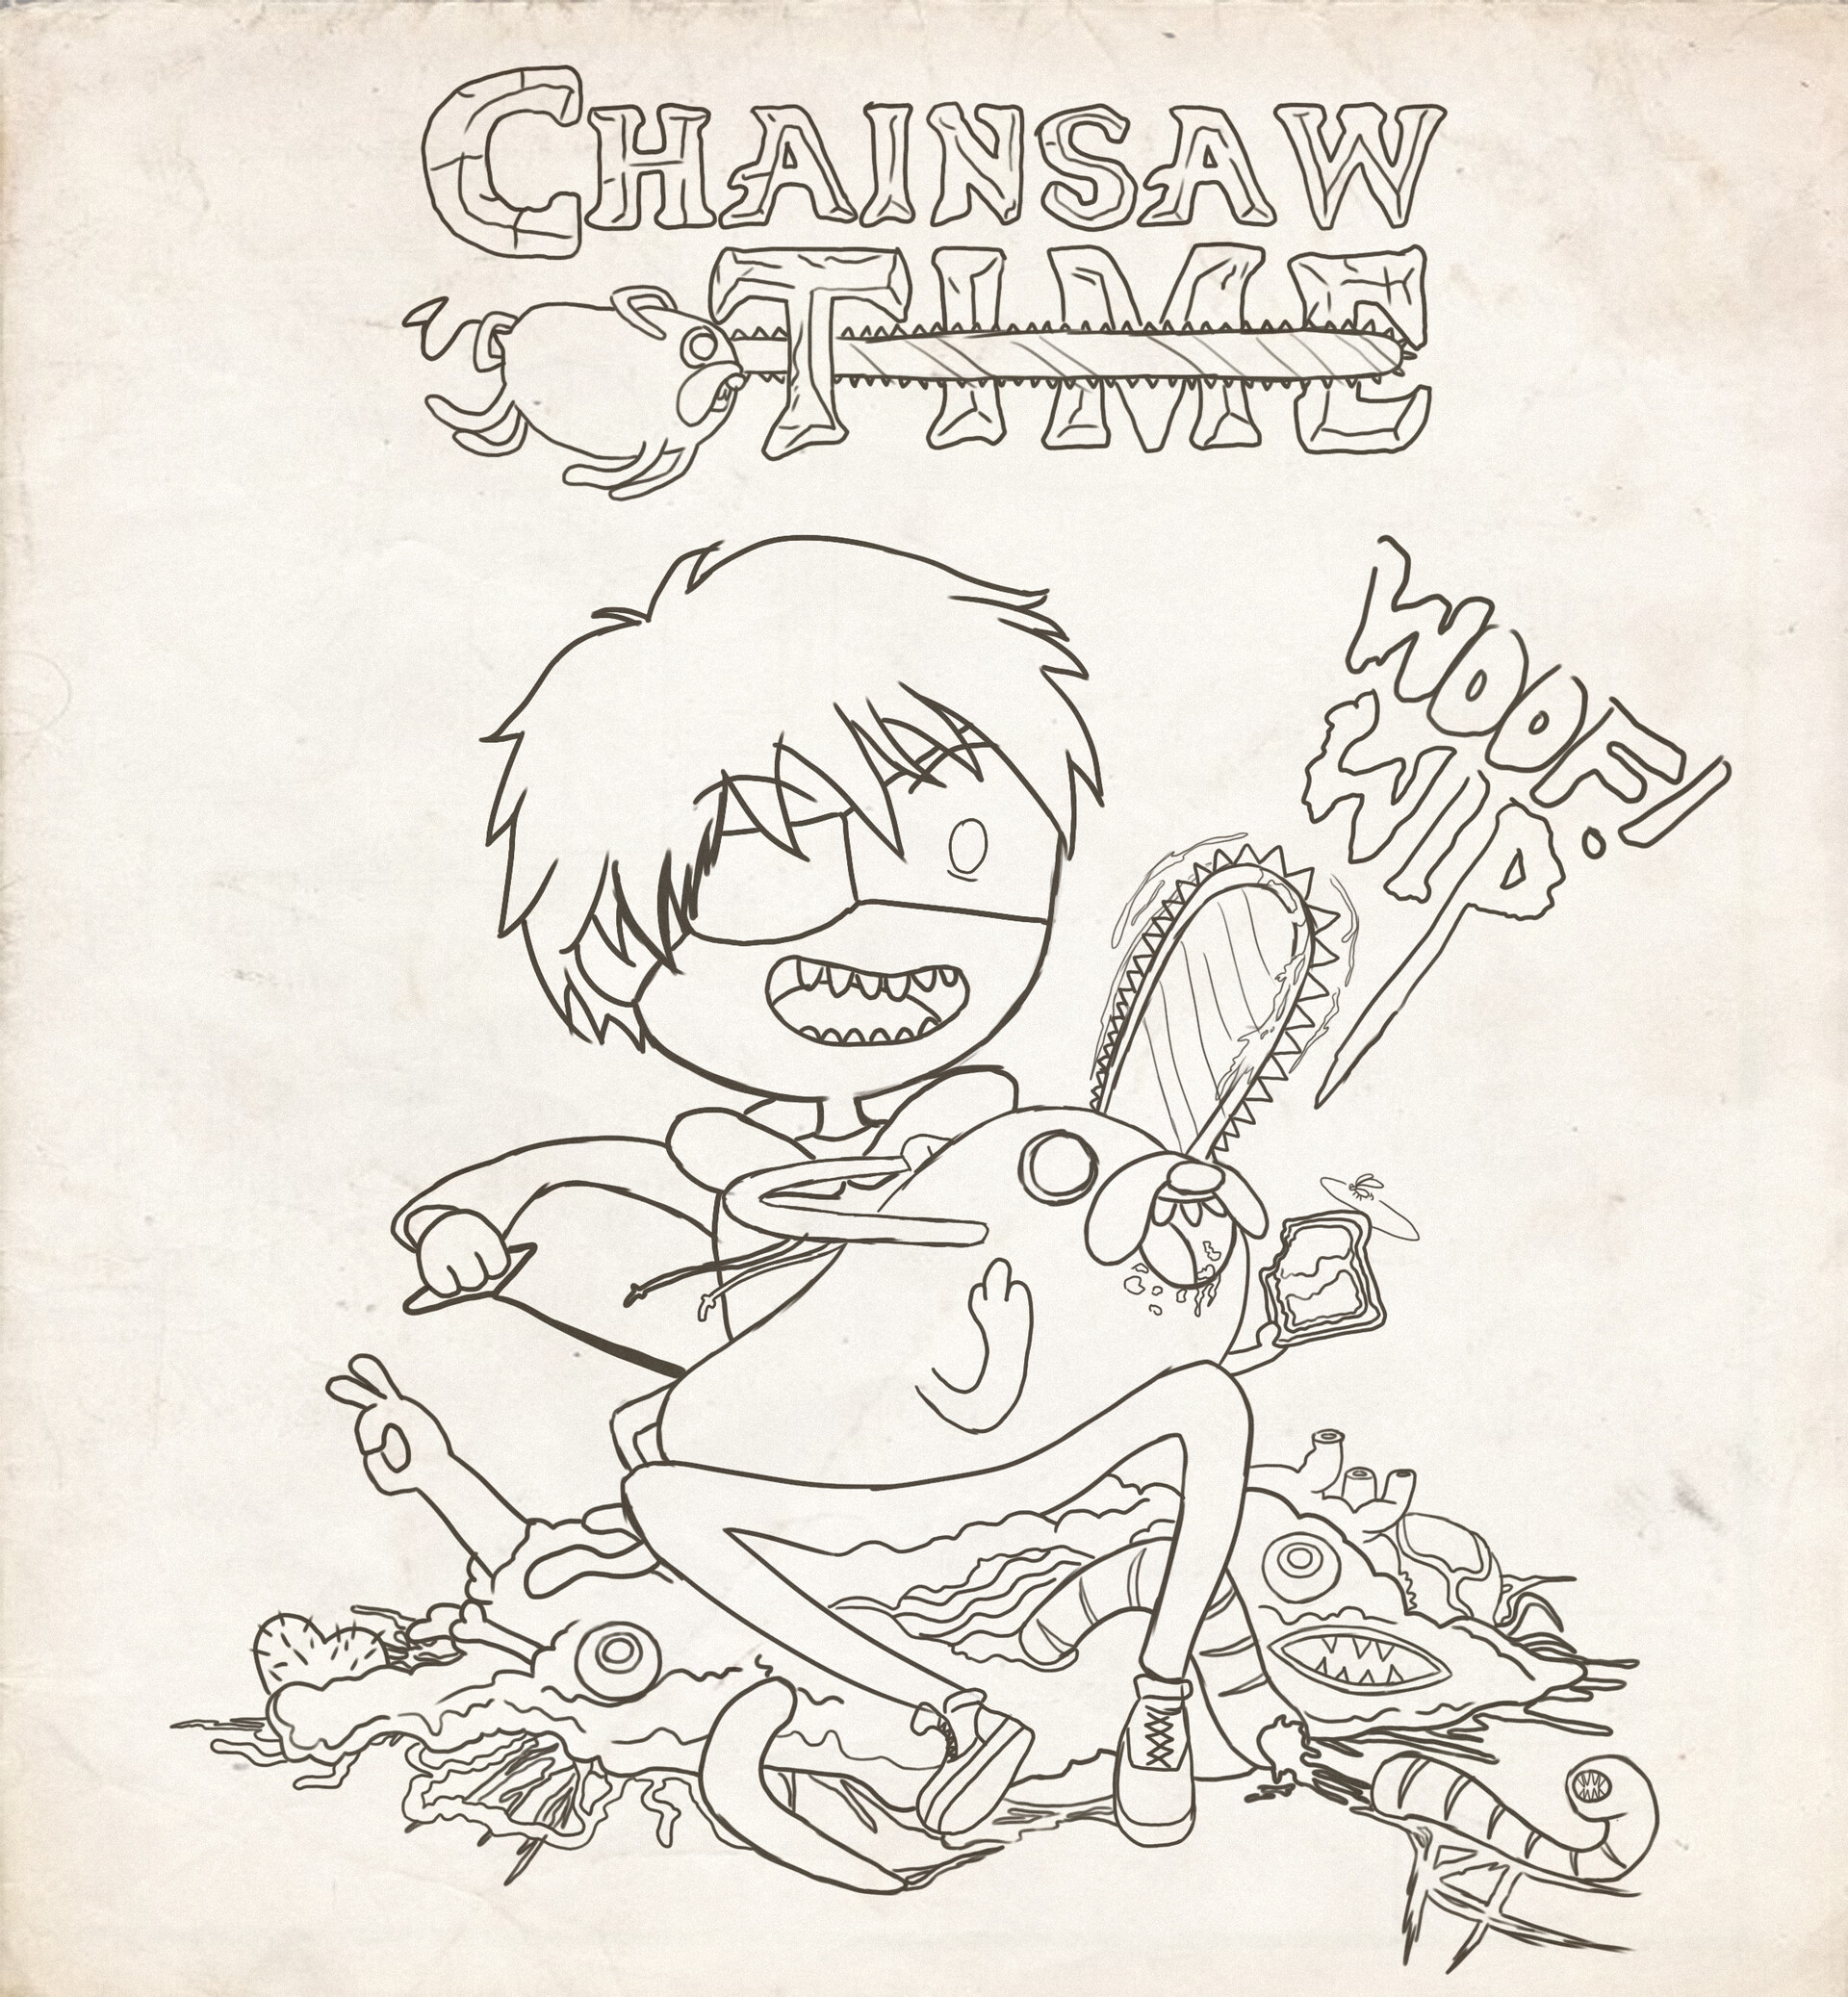 Chainsaw Man Becomes Adventure Time In Official Storyboarder's Art